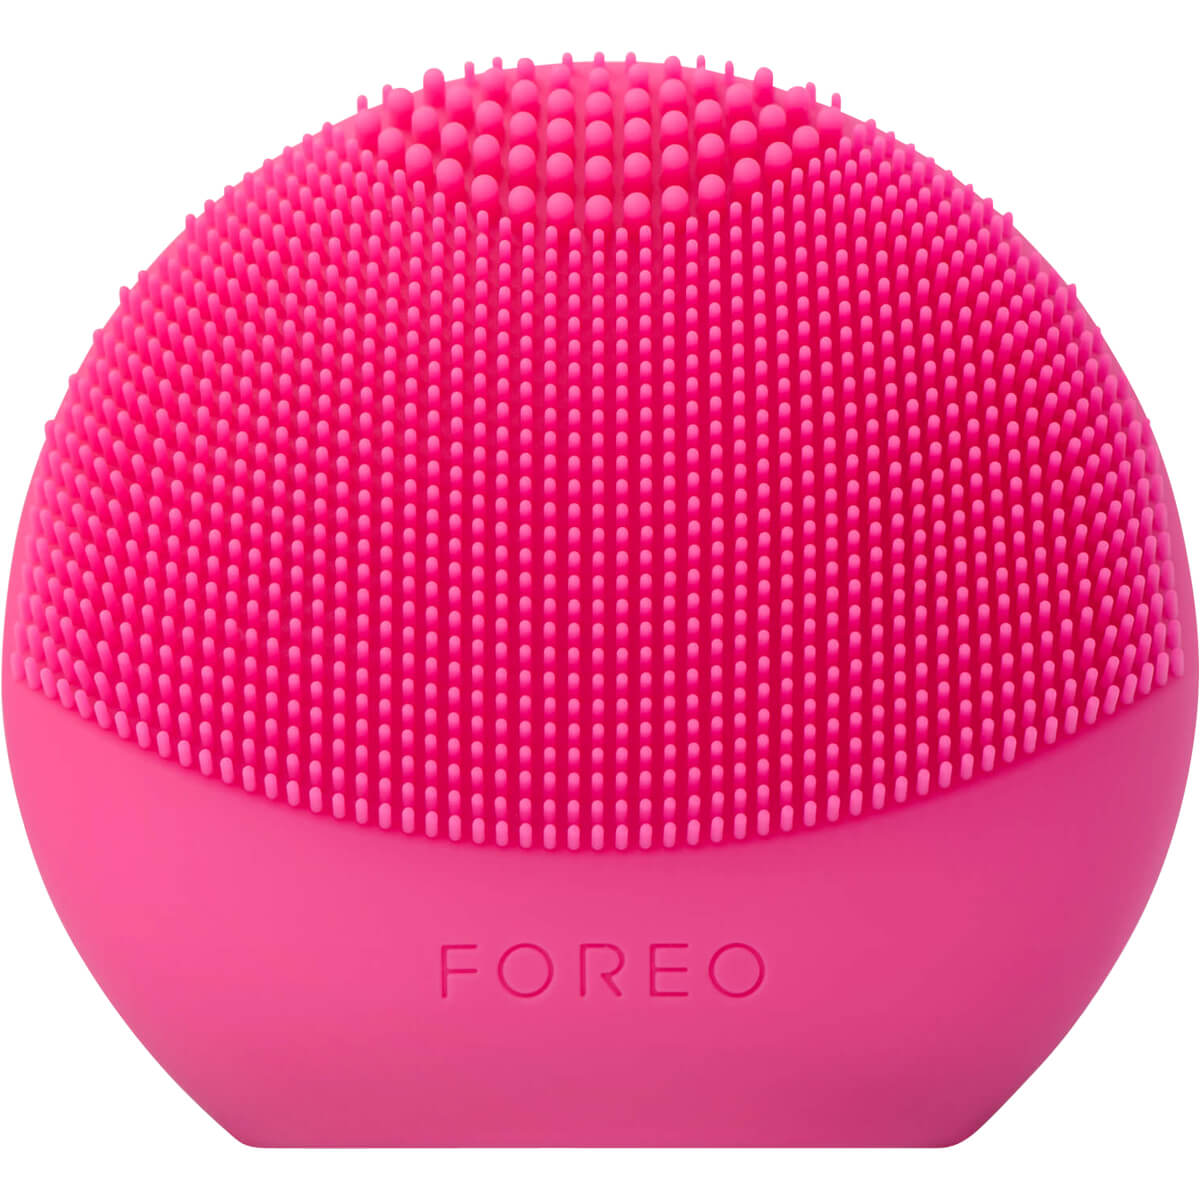 FOREO LUNA™ play smart 2 Smart Skin Analysis And Facial Cleansing